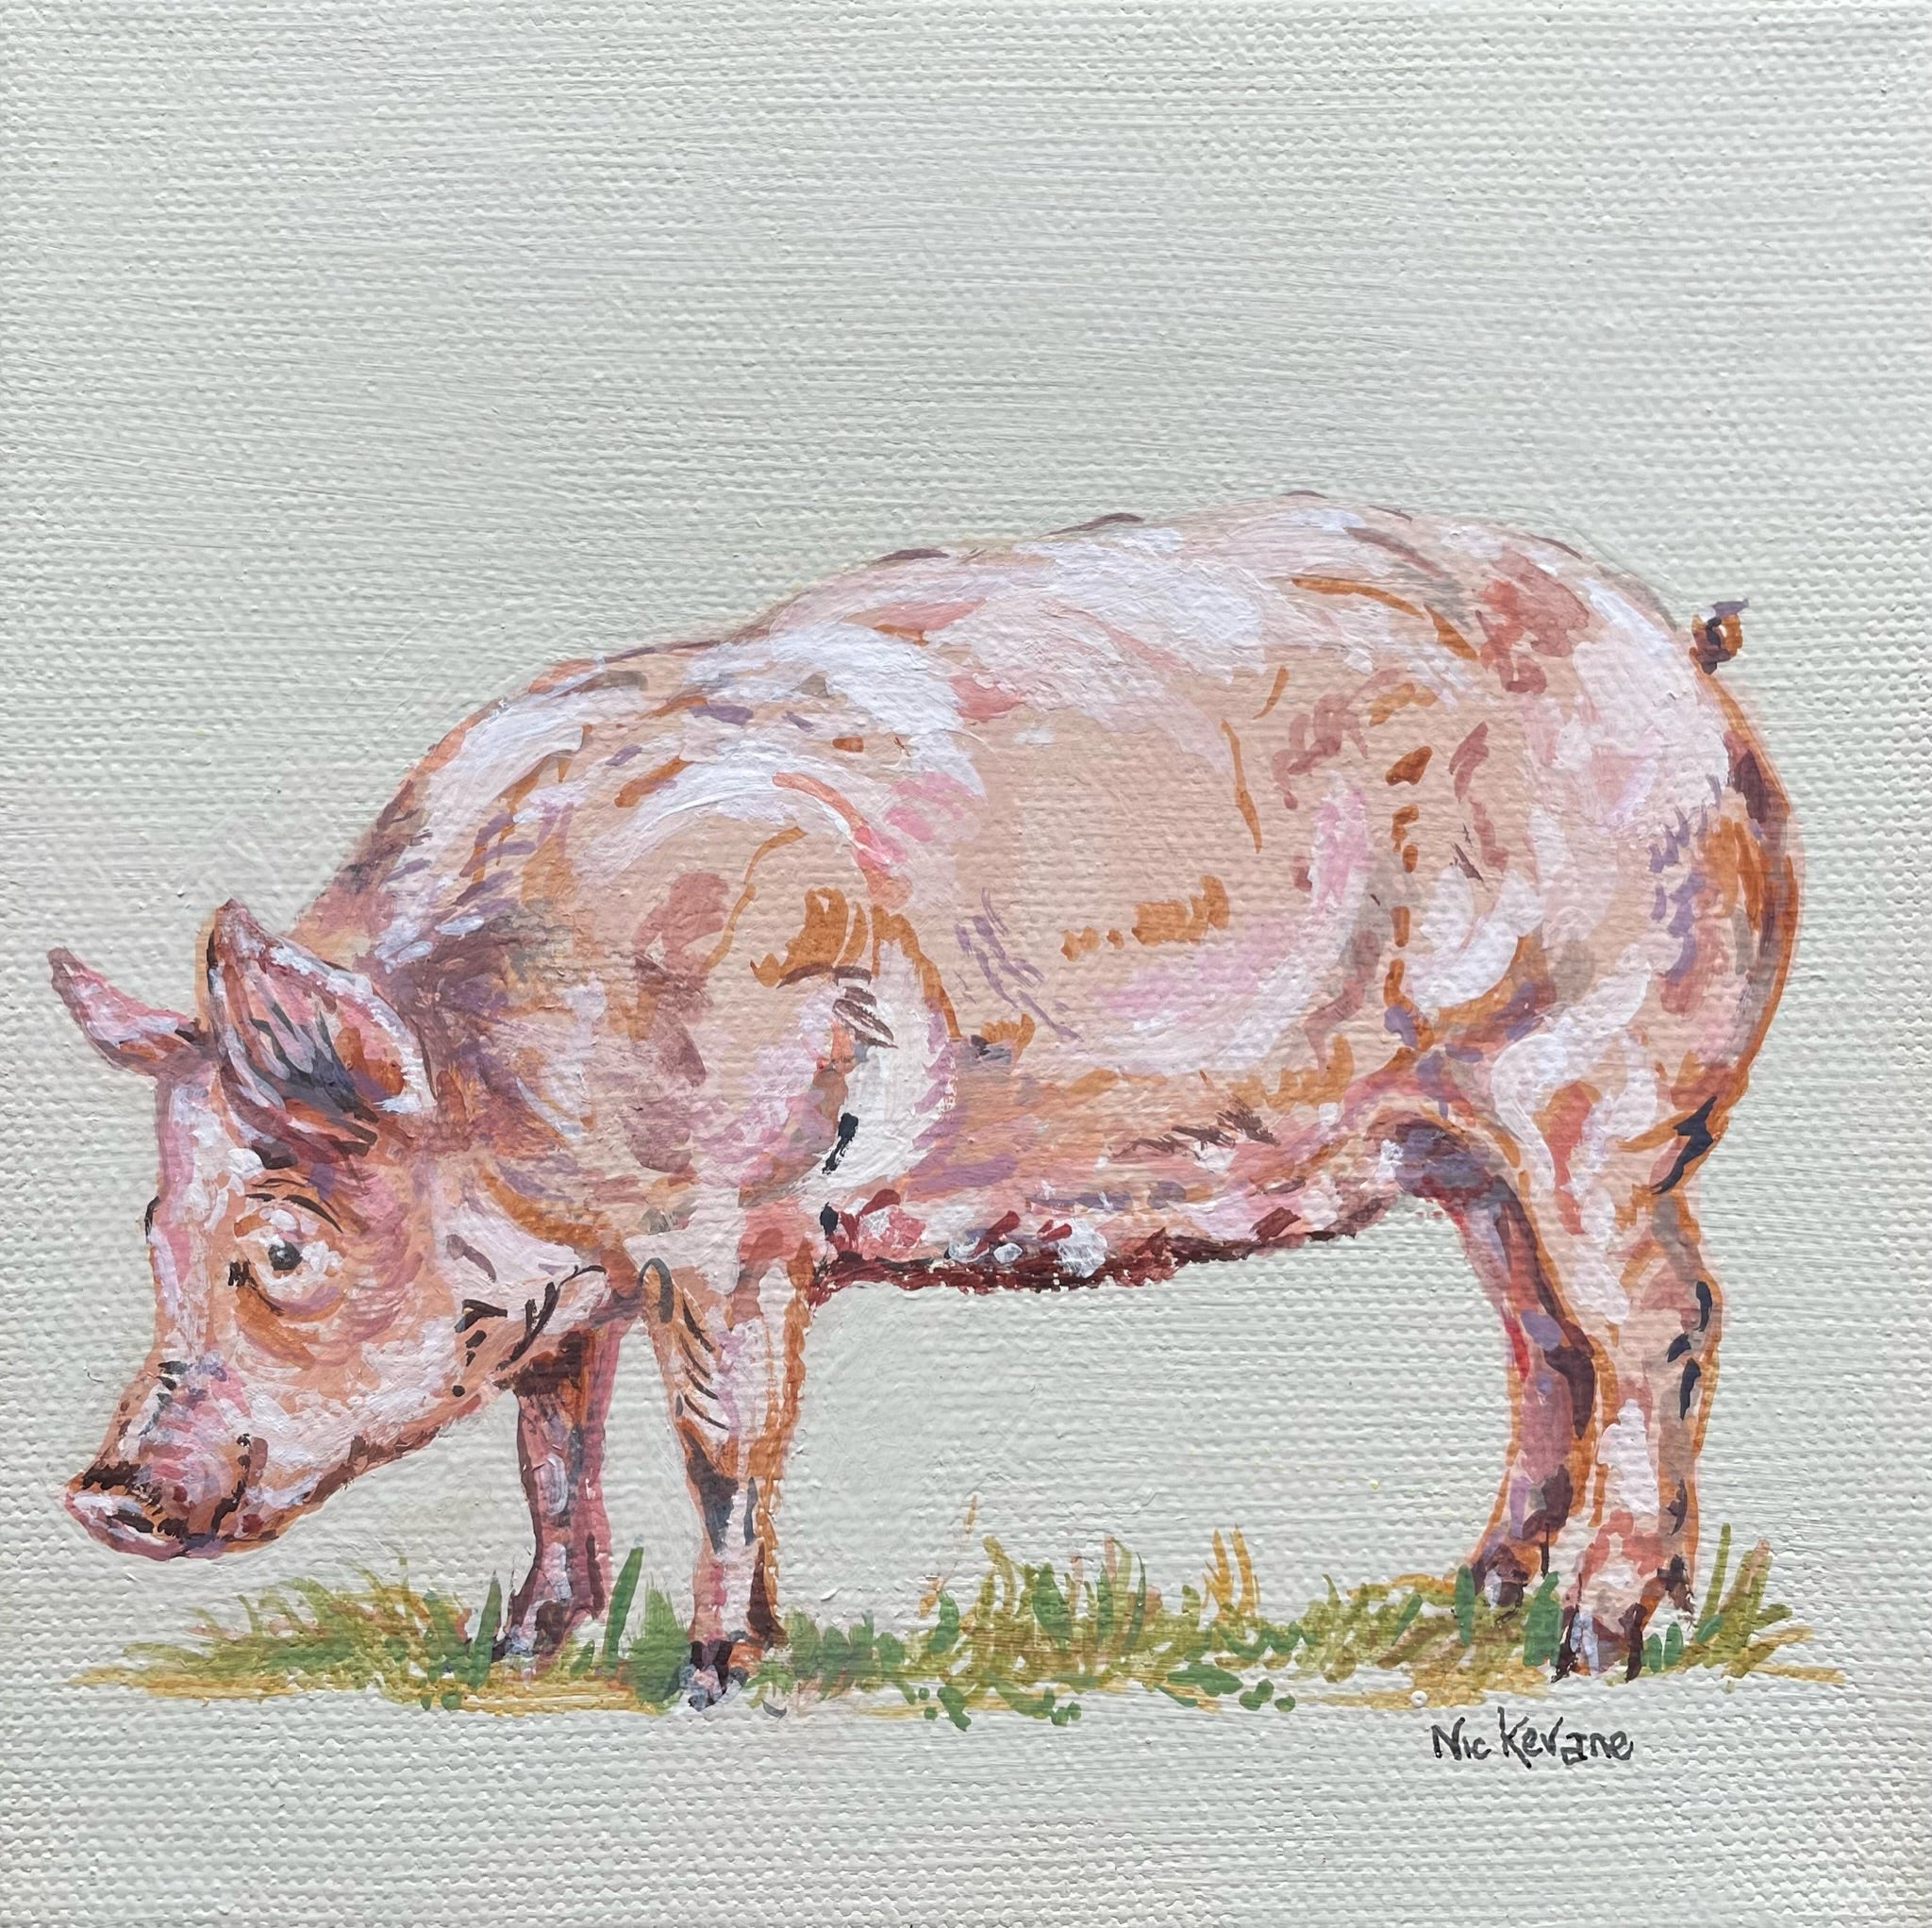 Happy Pig - My mini paintings depict various countryside subjects painted on soft off-white backgrounds.